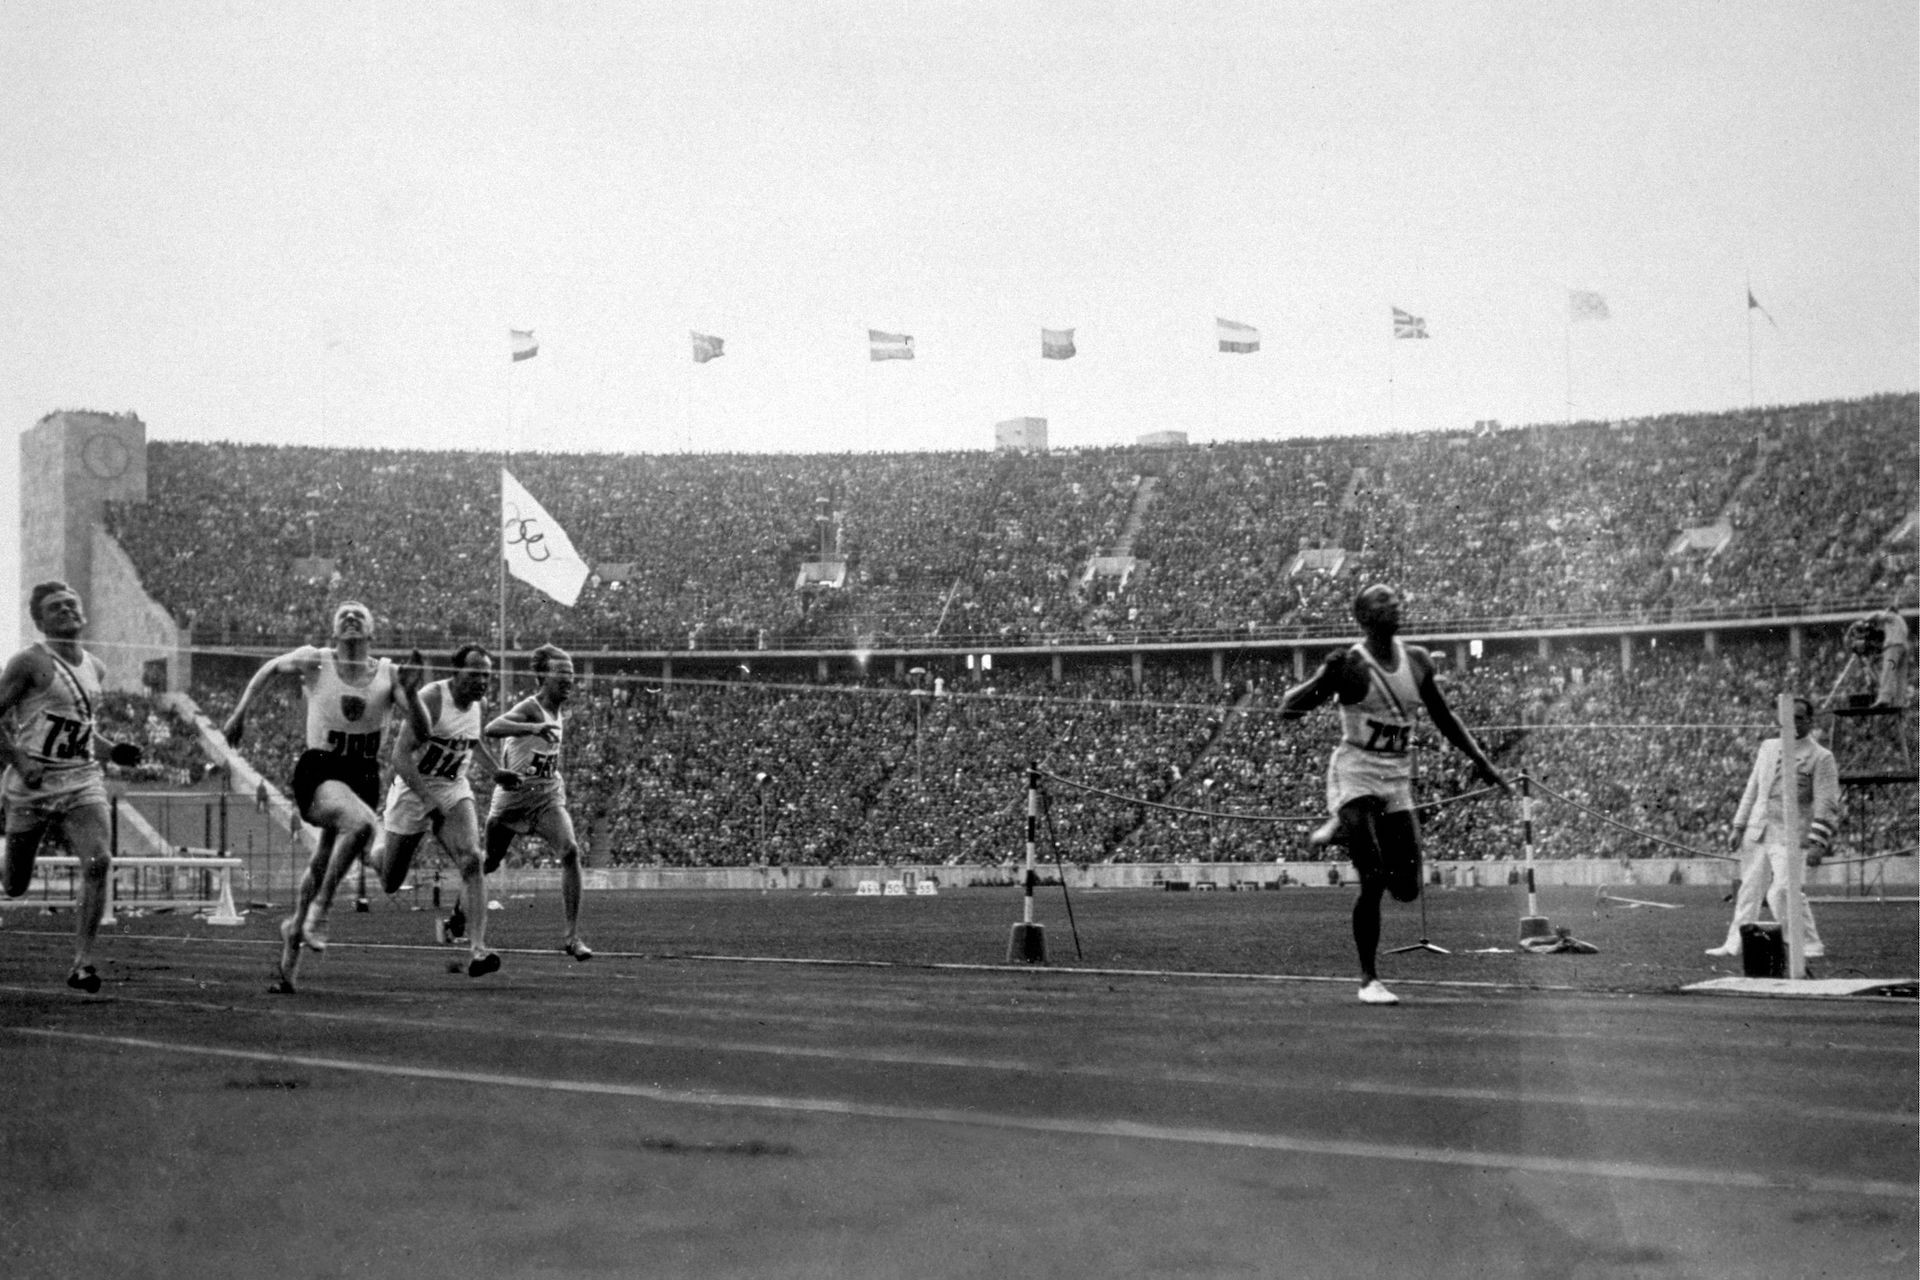 Jesse Owens crosses the finishing line to win the 100 metres at the 1936 Olympics in Berlin. GETTY IMAGES